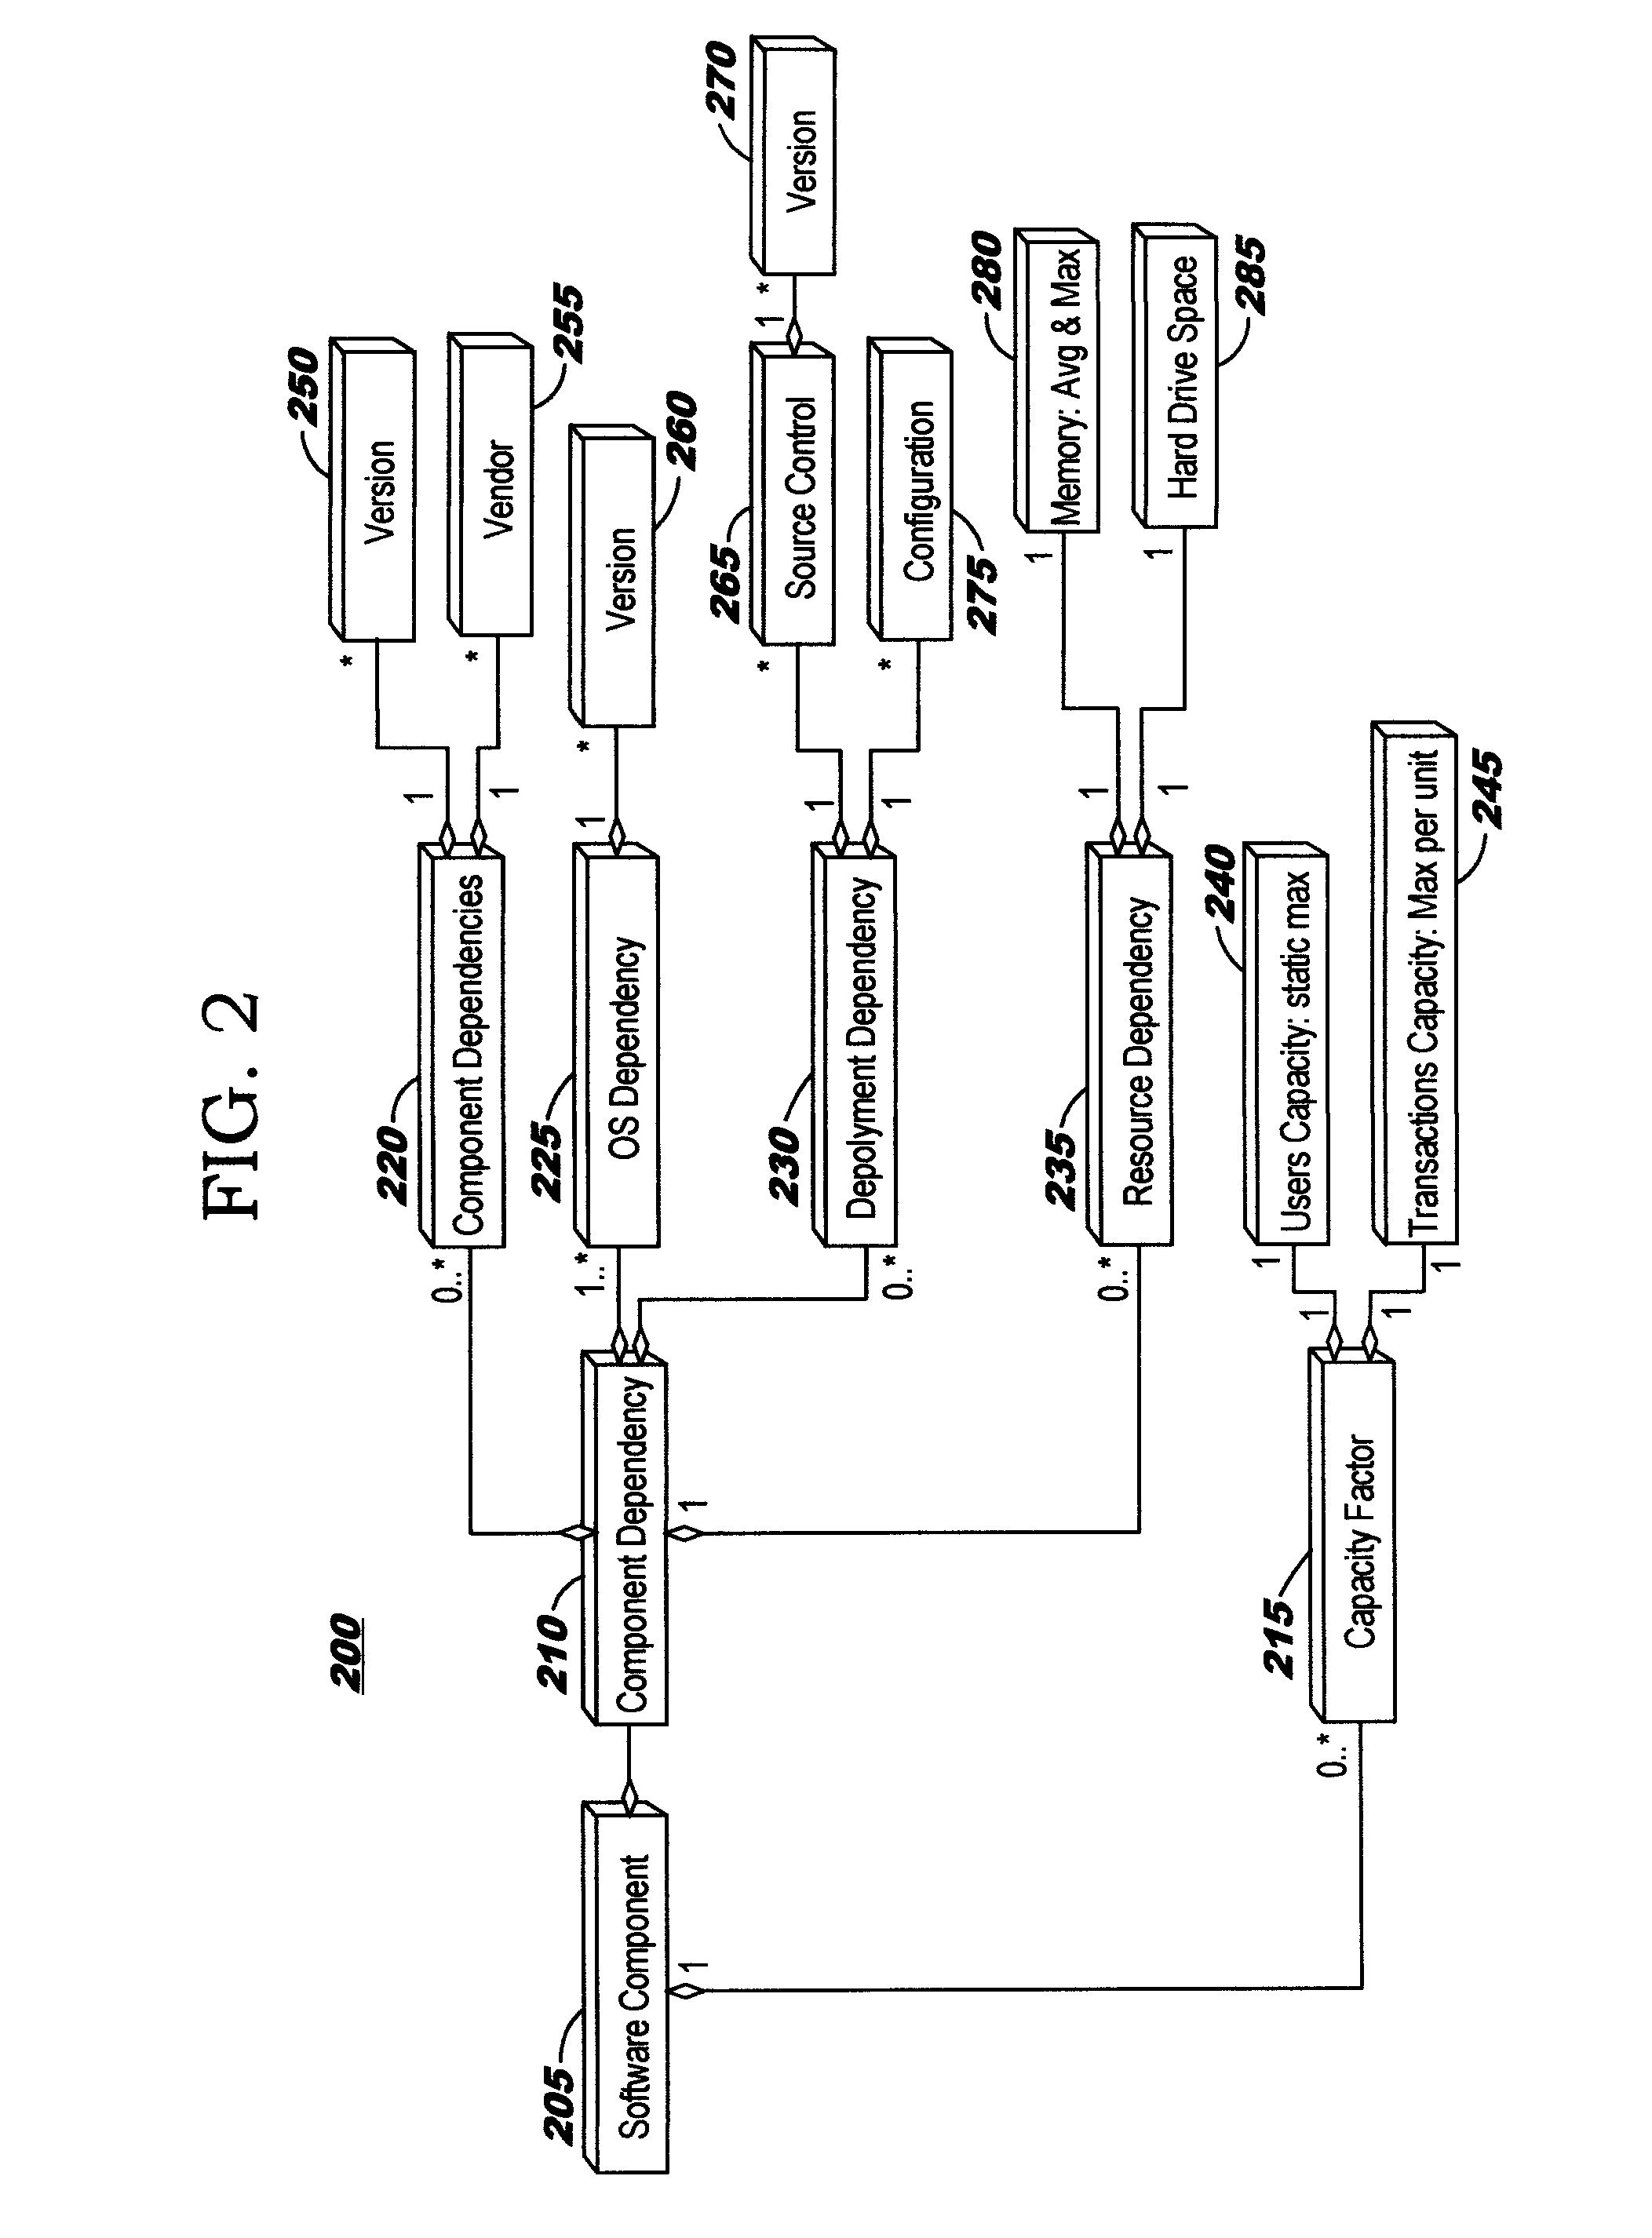 Automated Deployment of a Configured System into a Computing Environment